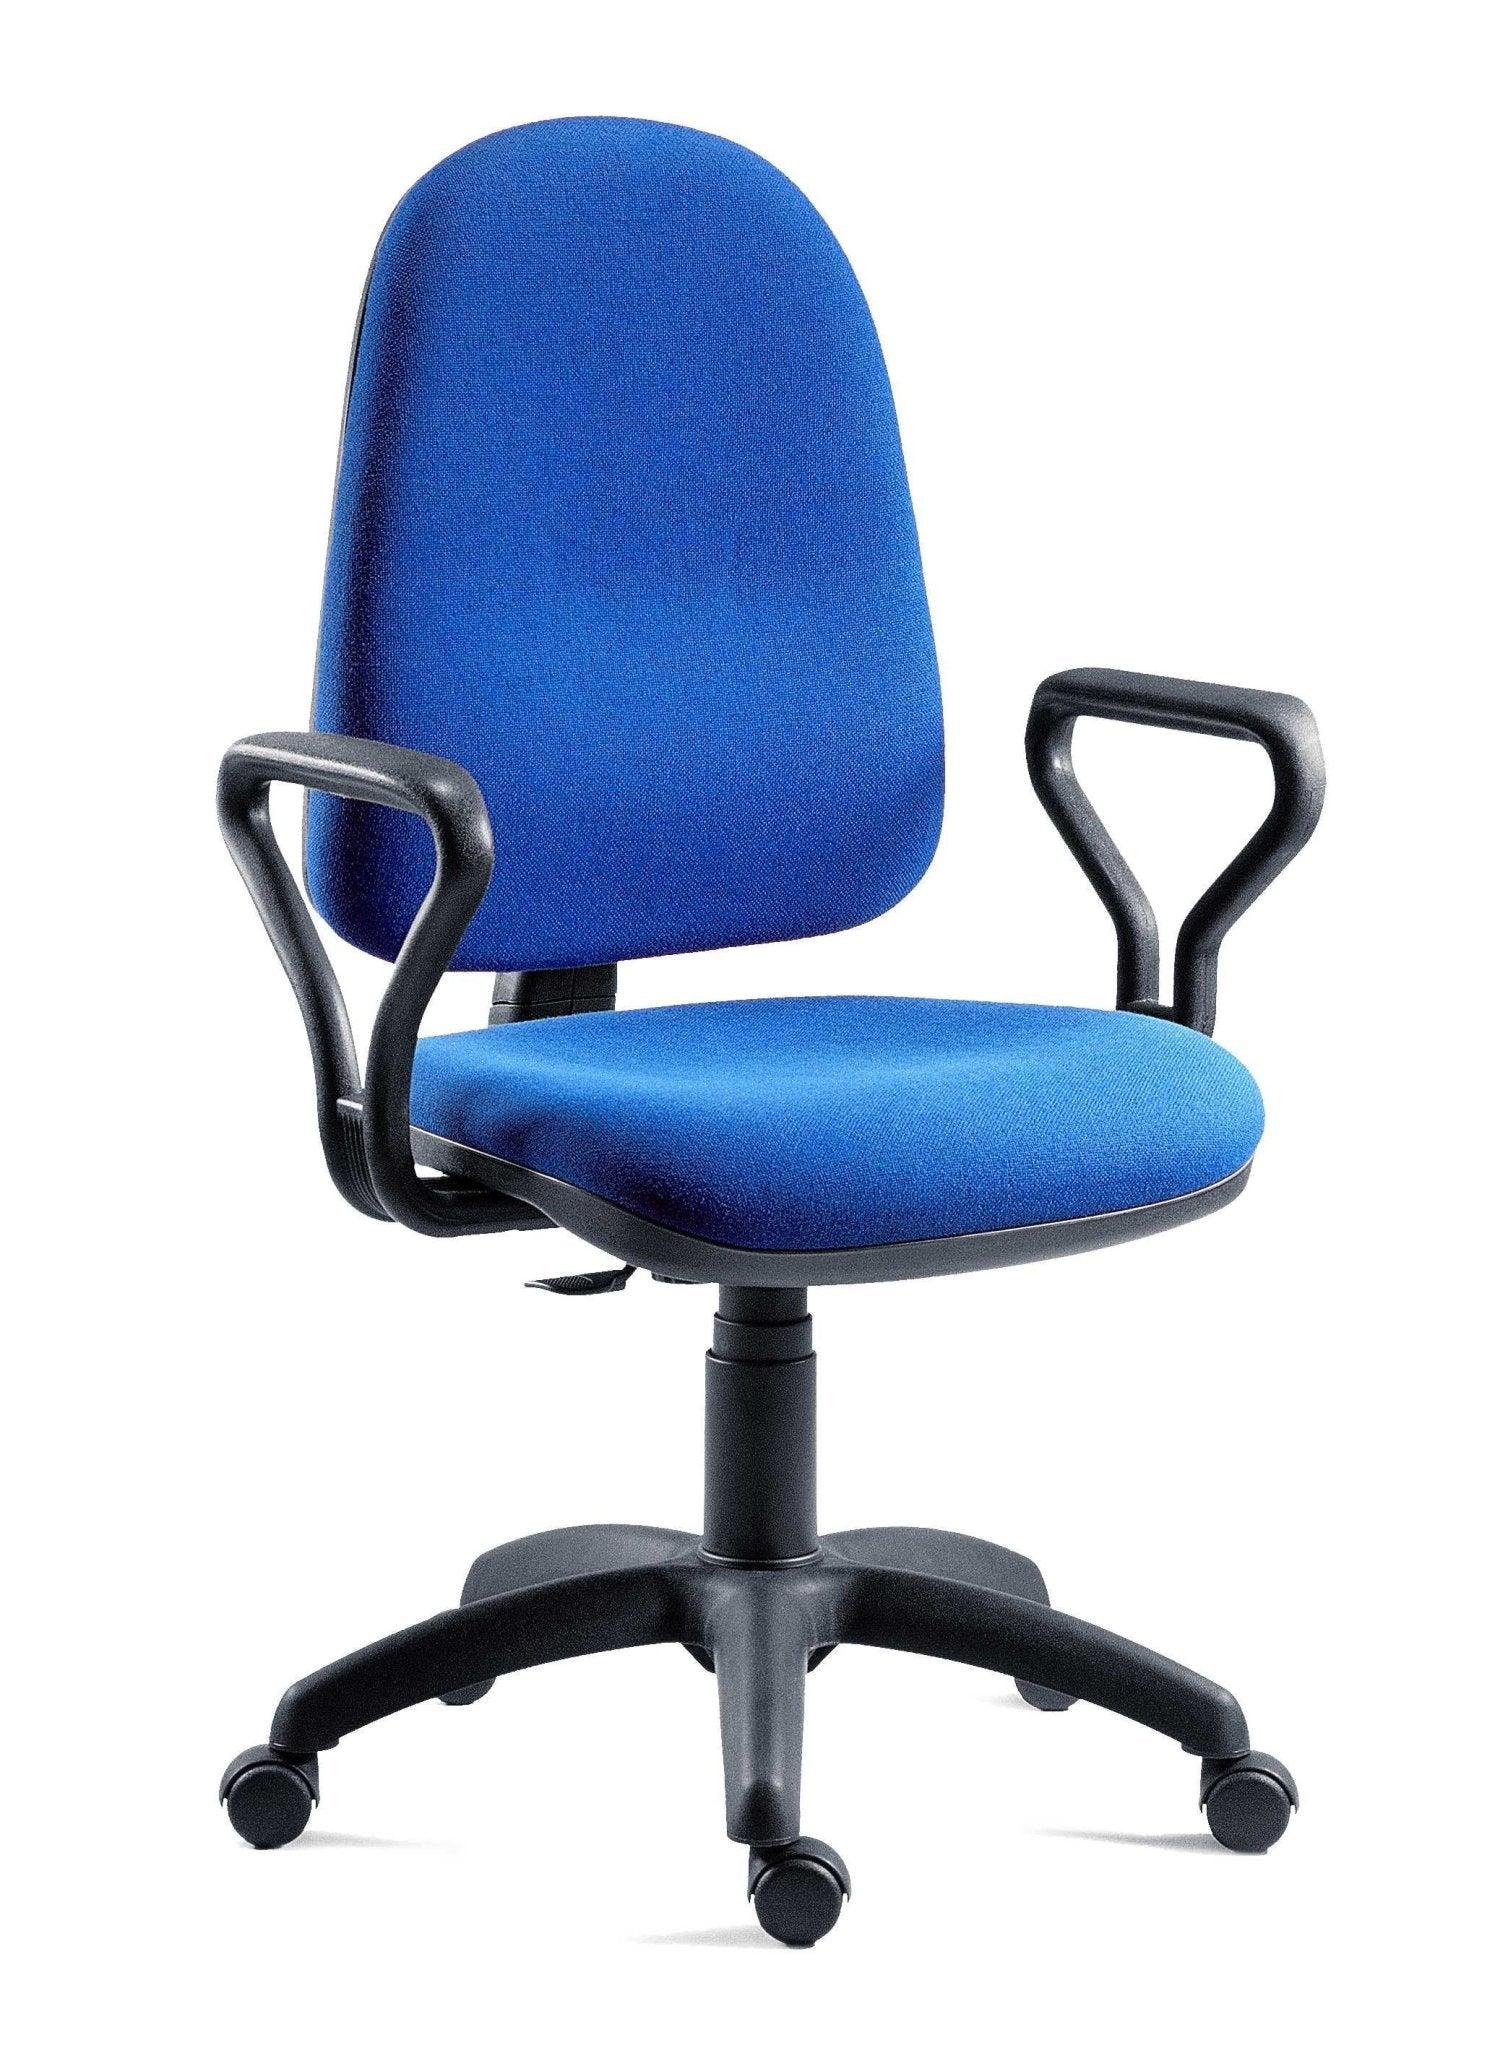 Price blaster high pc office chair (blue) - image 2